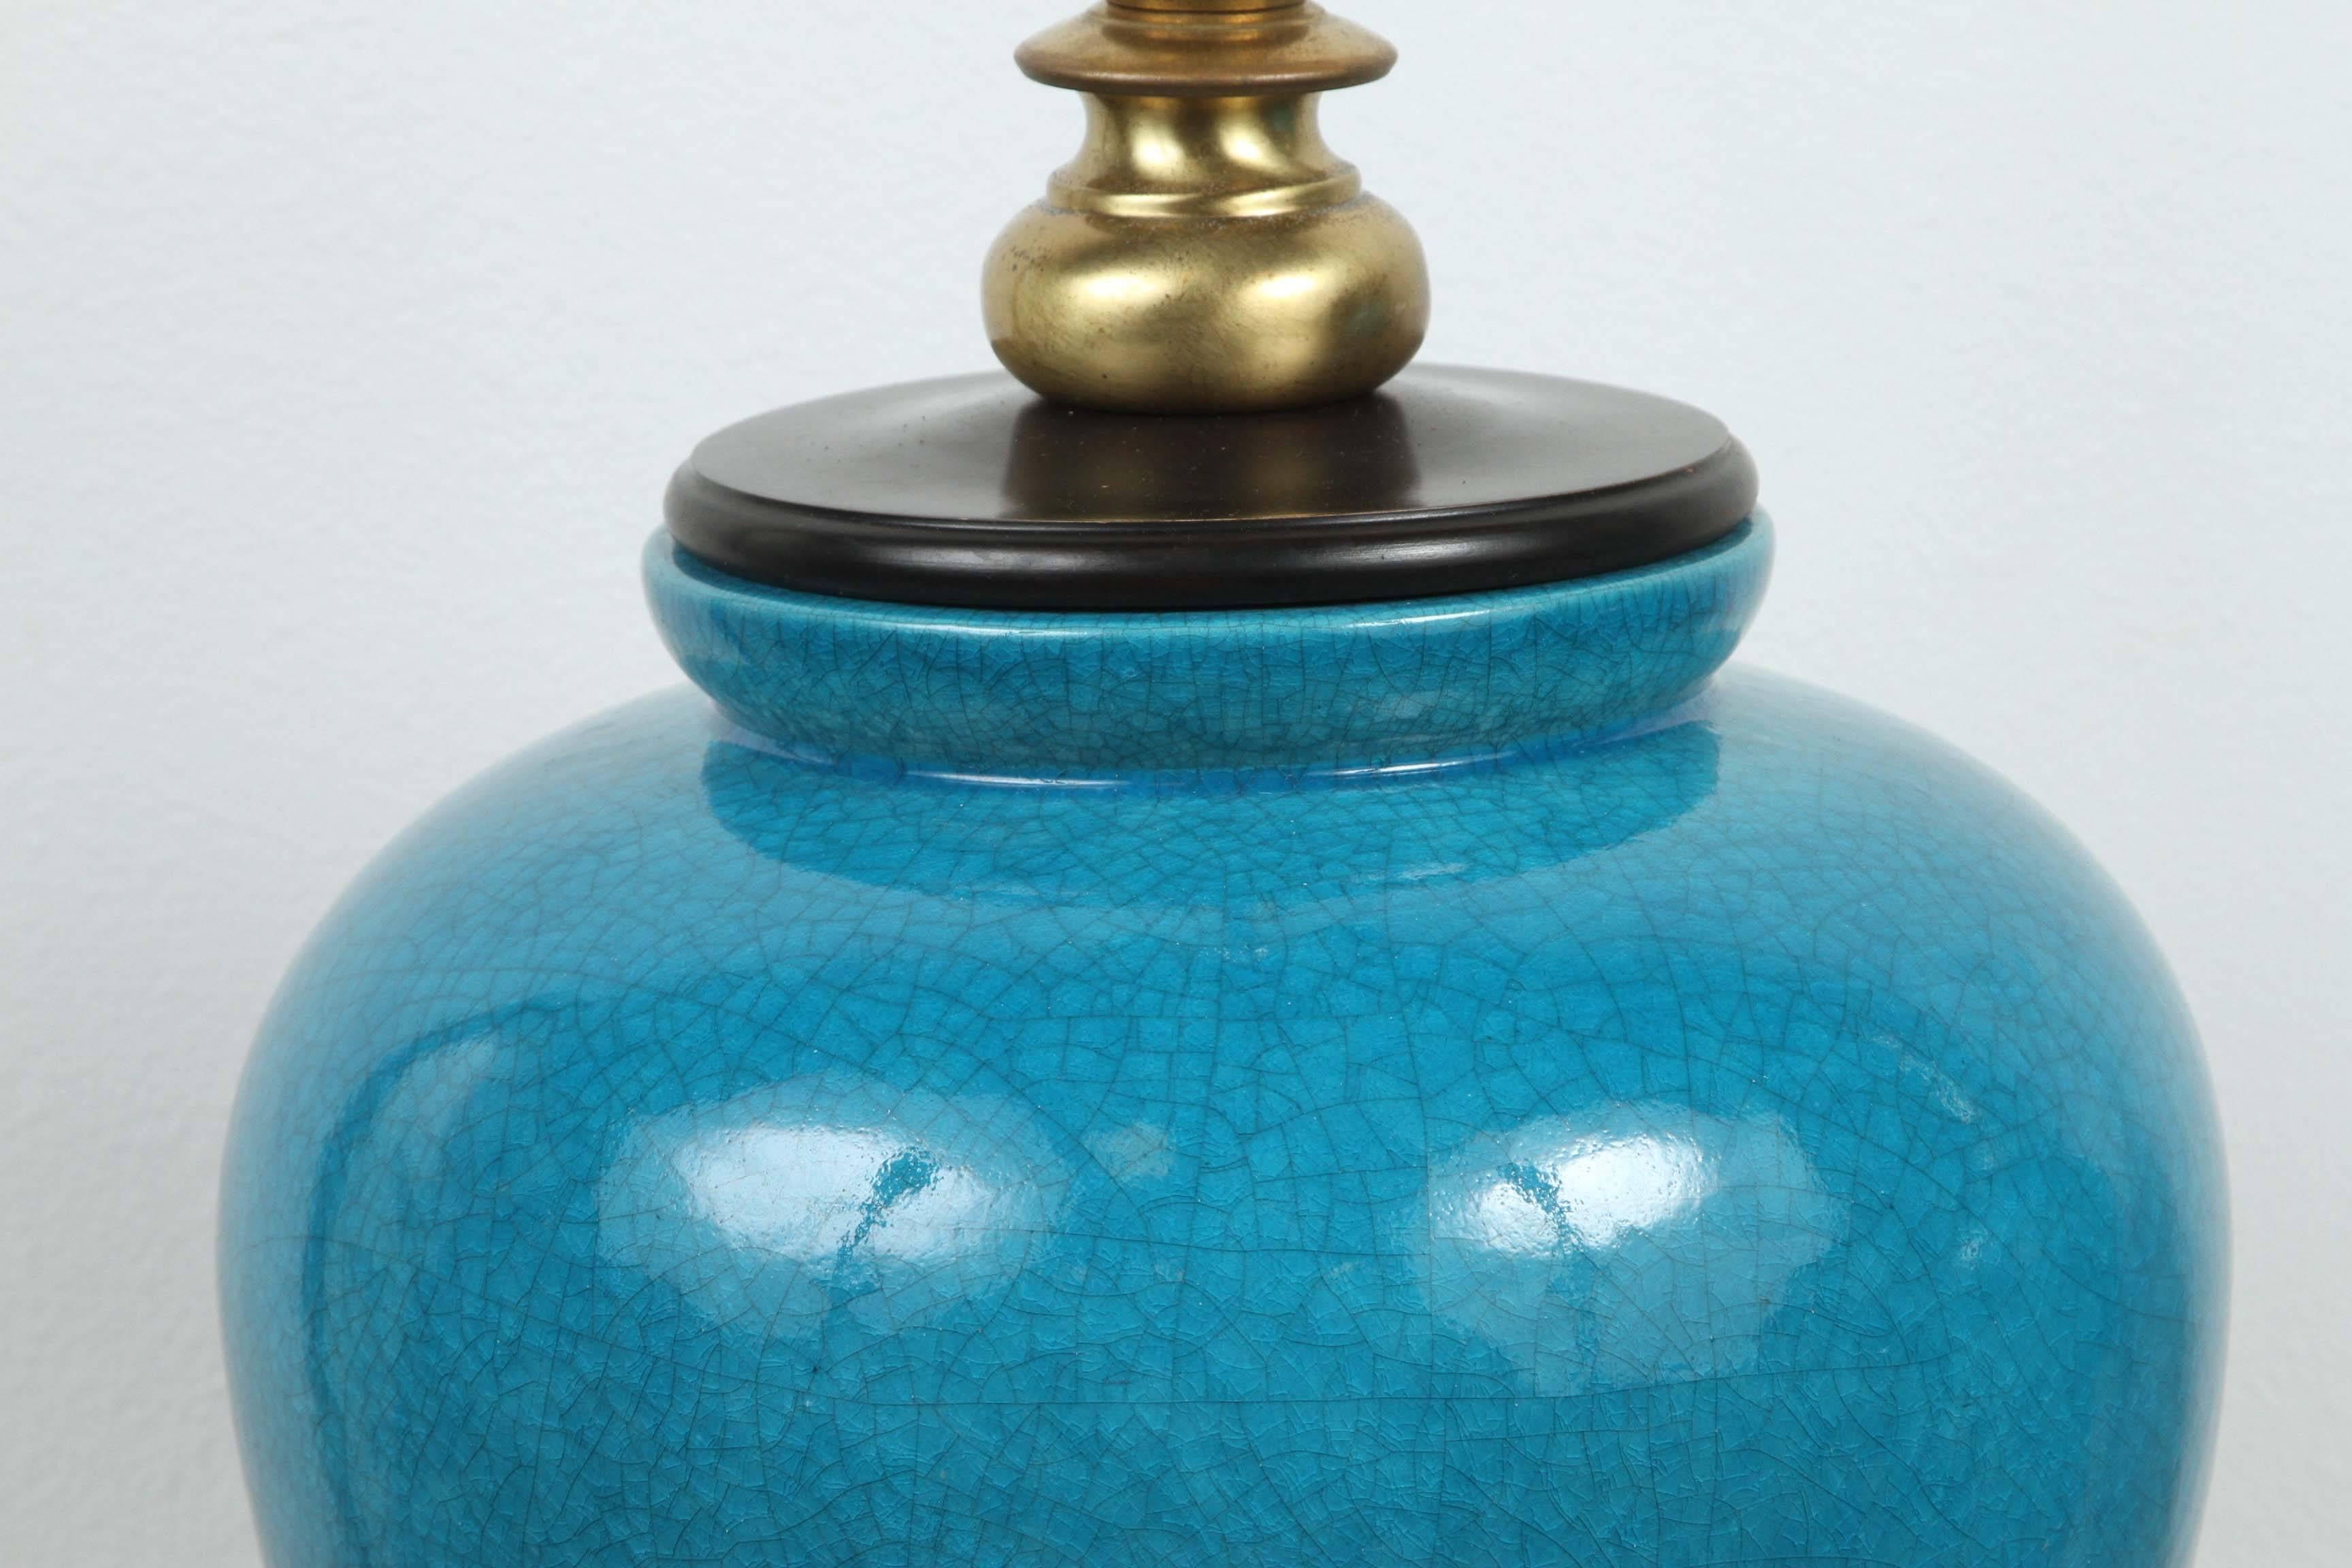 Glazed Pair of Large Ceramic Table Lamps with a Gorgeous Cerulean Glaze